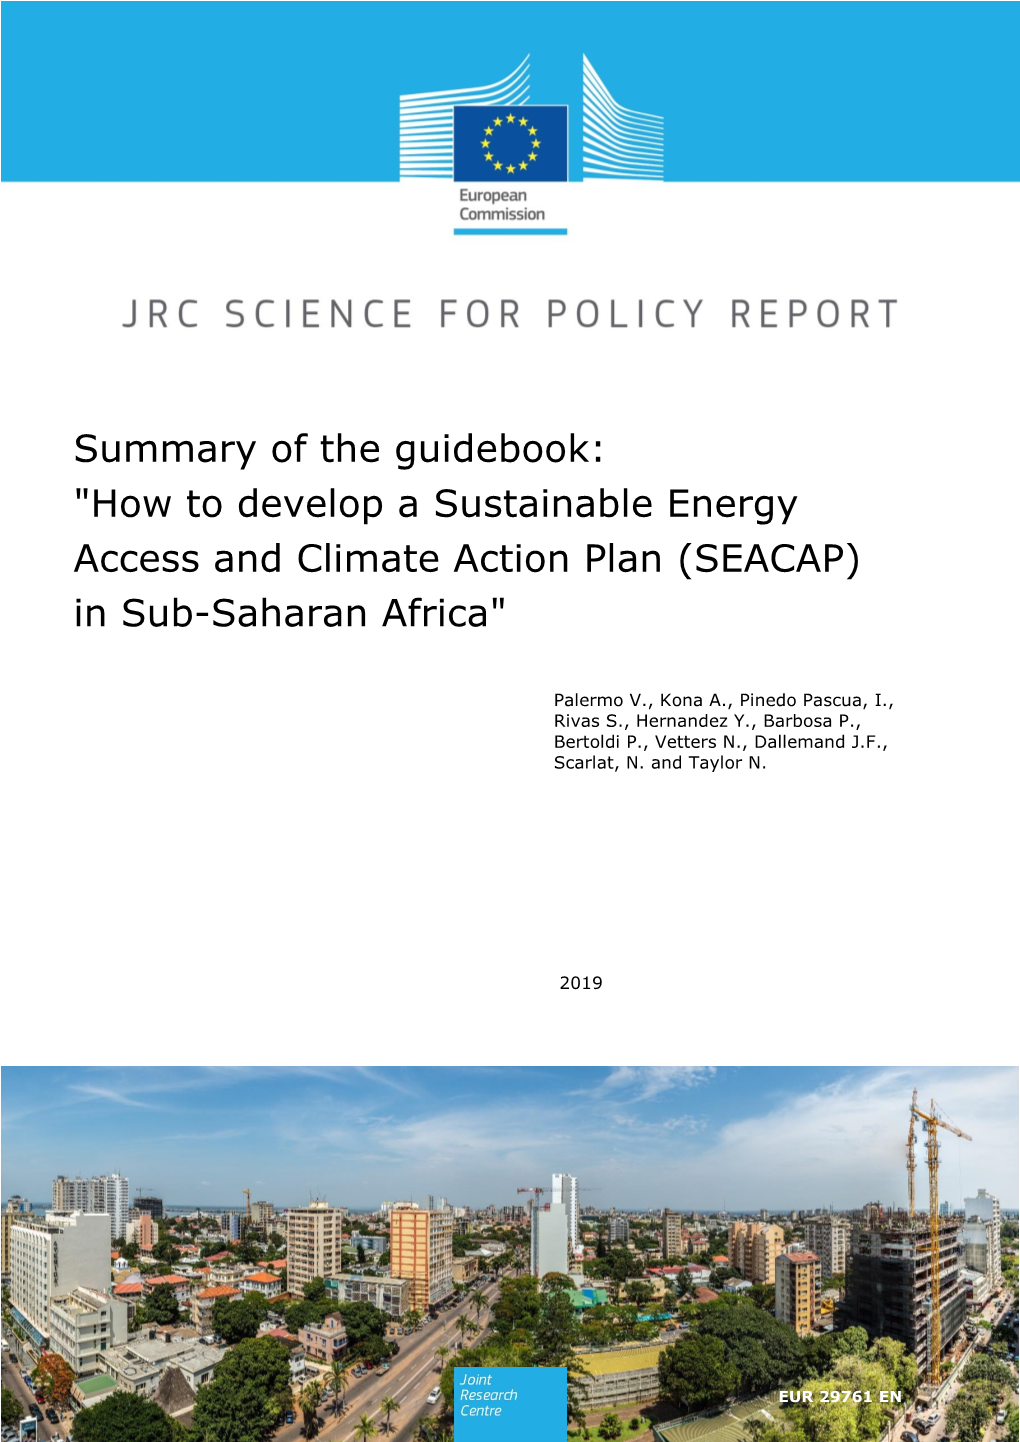 Summary of the Guidebook: "How to Develop a Sustainable Energy Access and Climate Action Plan (SEACAP) in Sub-Saharan Africa"